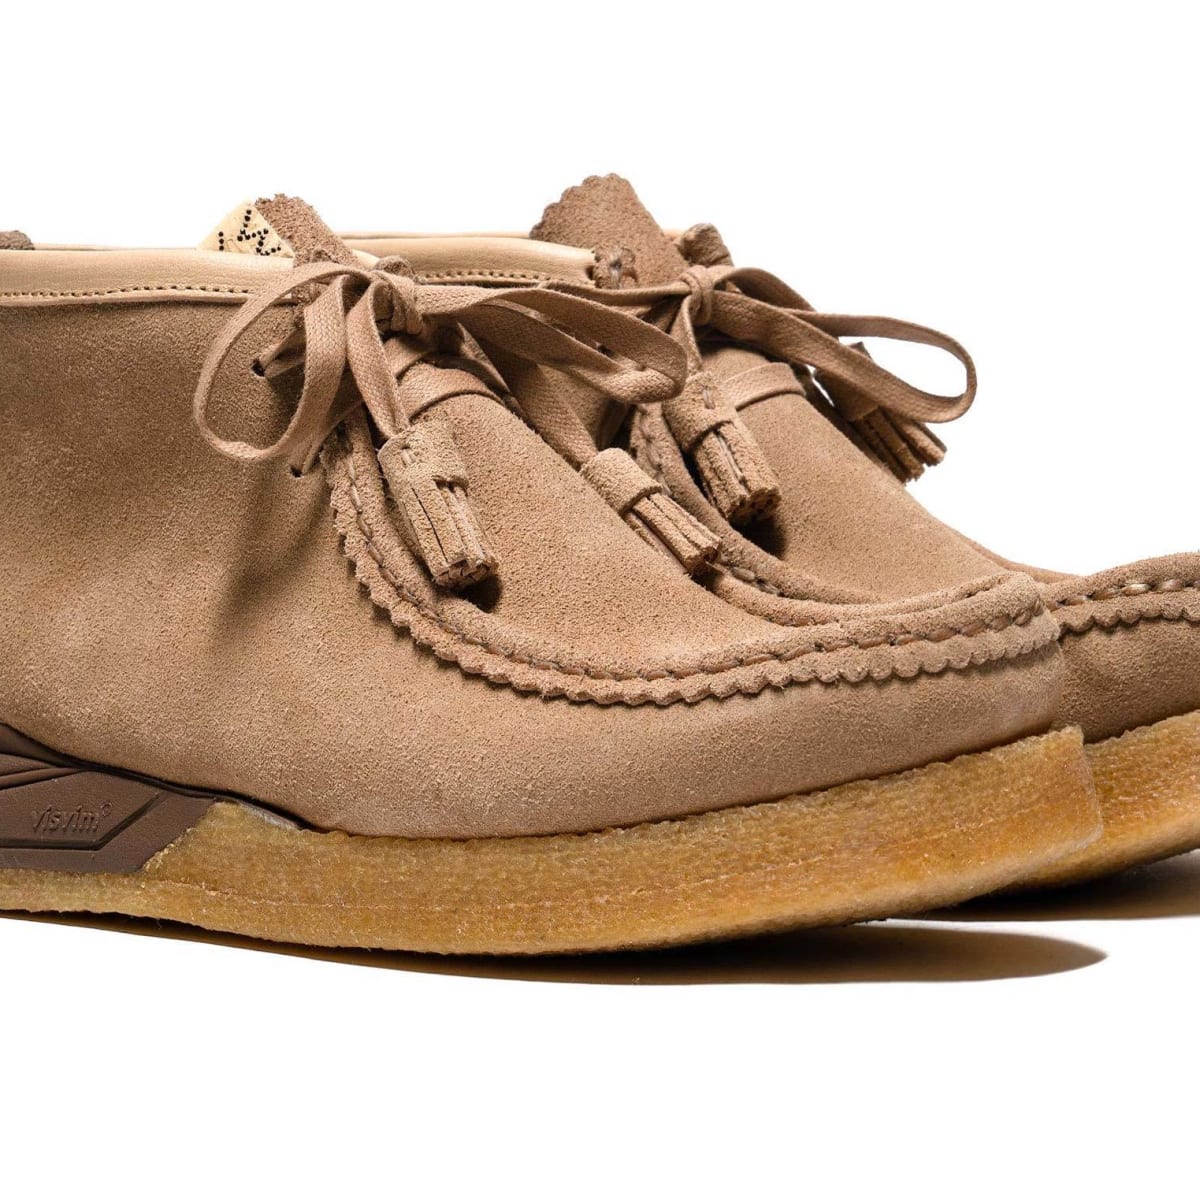 Visvim puts its stamp on the classic Wallabee silhouette - Acquire